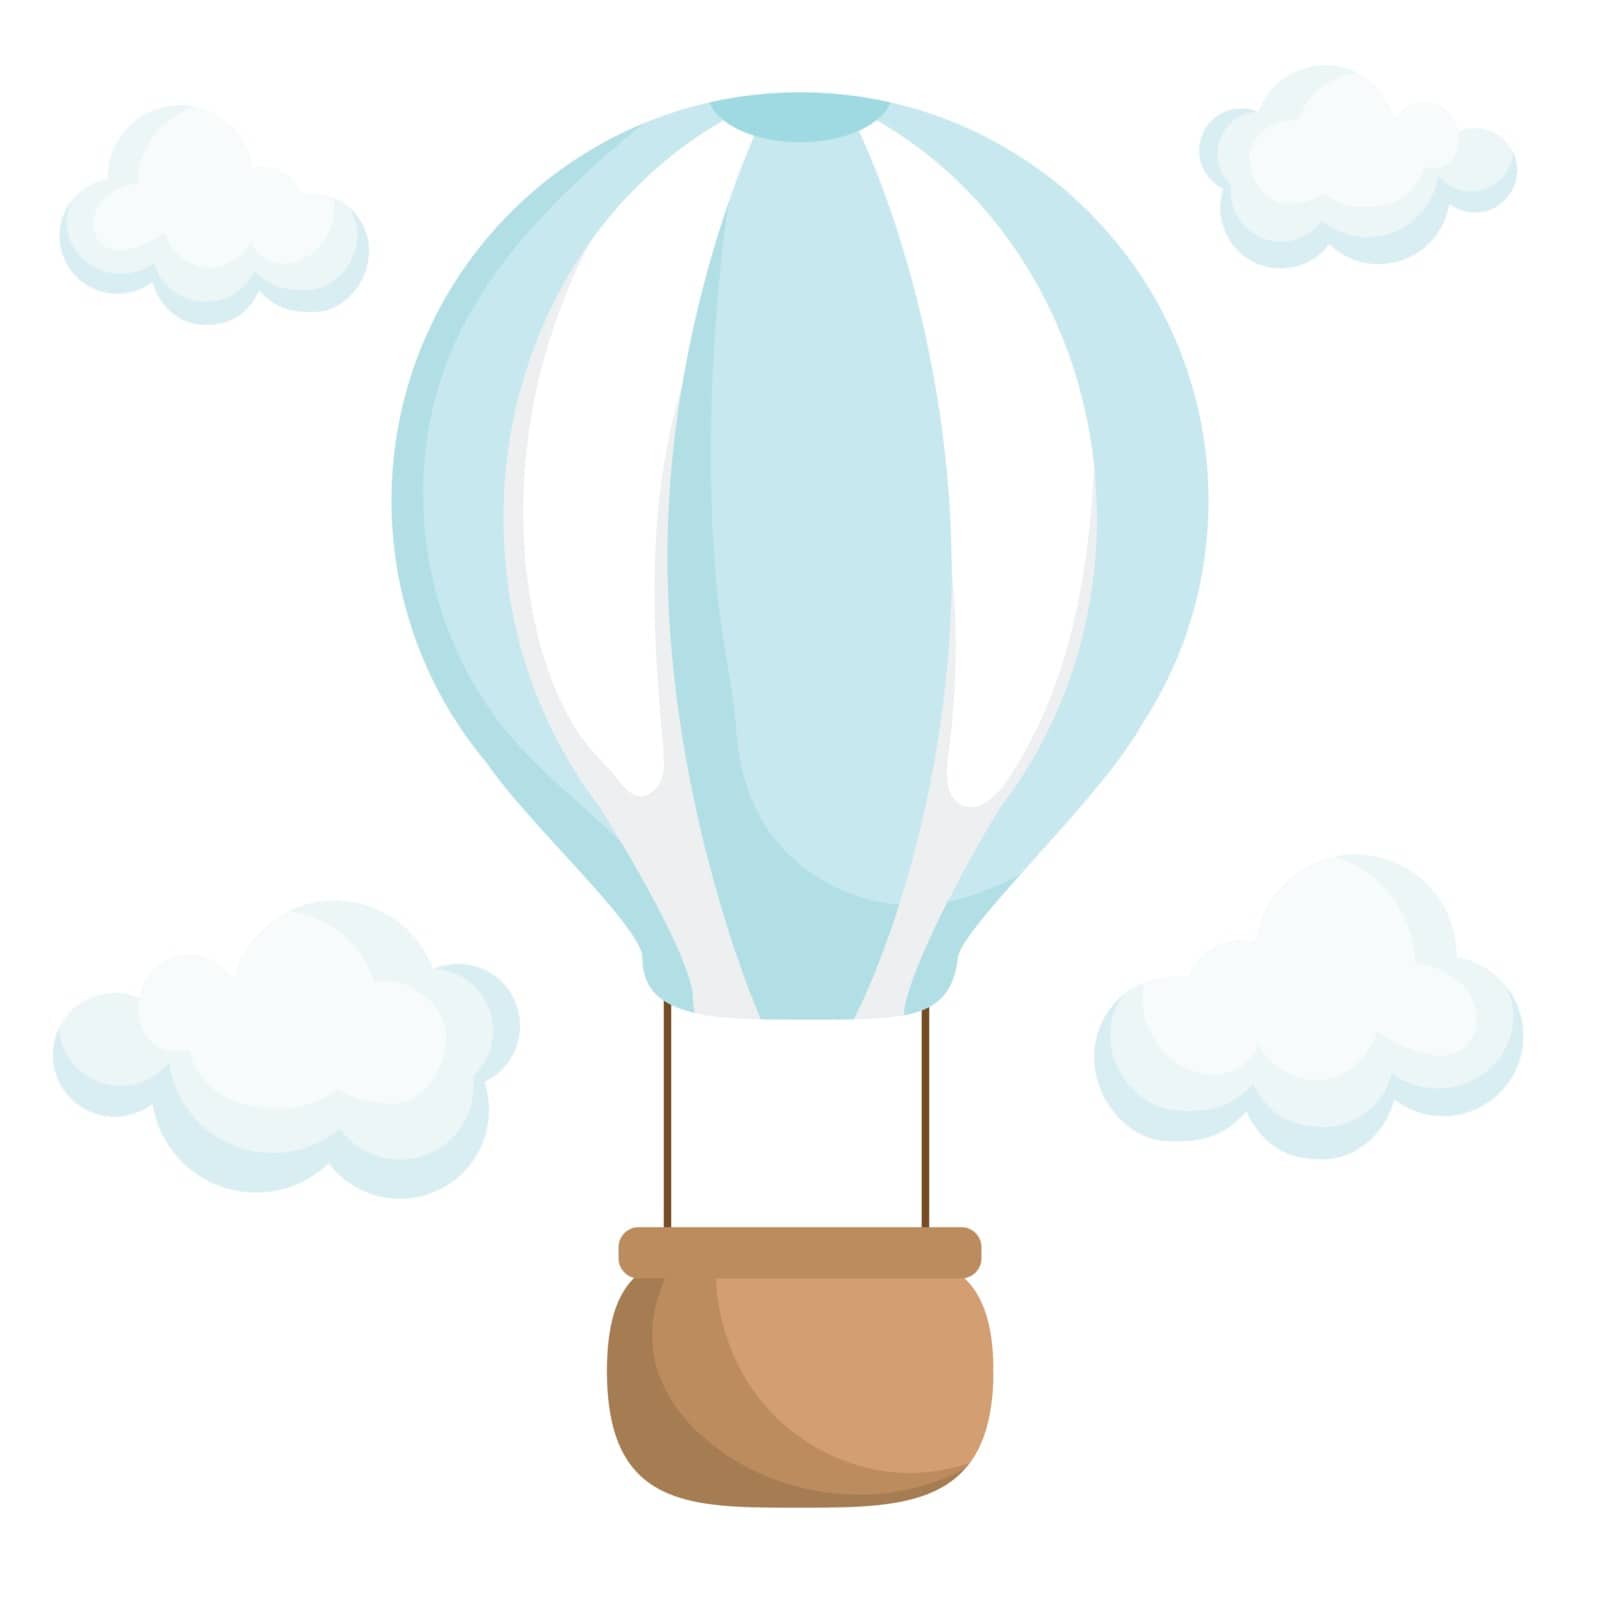 Turquoise striped hot air-balloon with brown basket with white clouds for design of album, scrapbook, card and invitation. Flat cartoon colorful vector illustration isolated on white background. by Melnyk